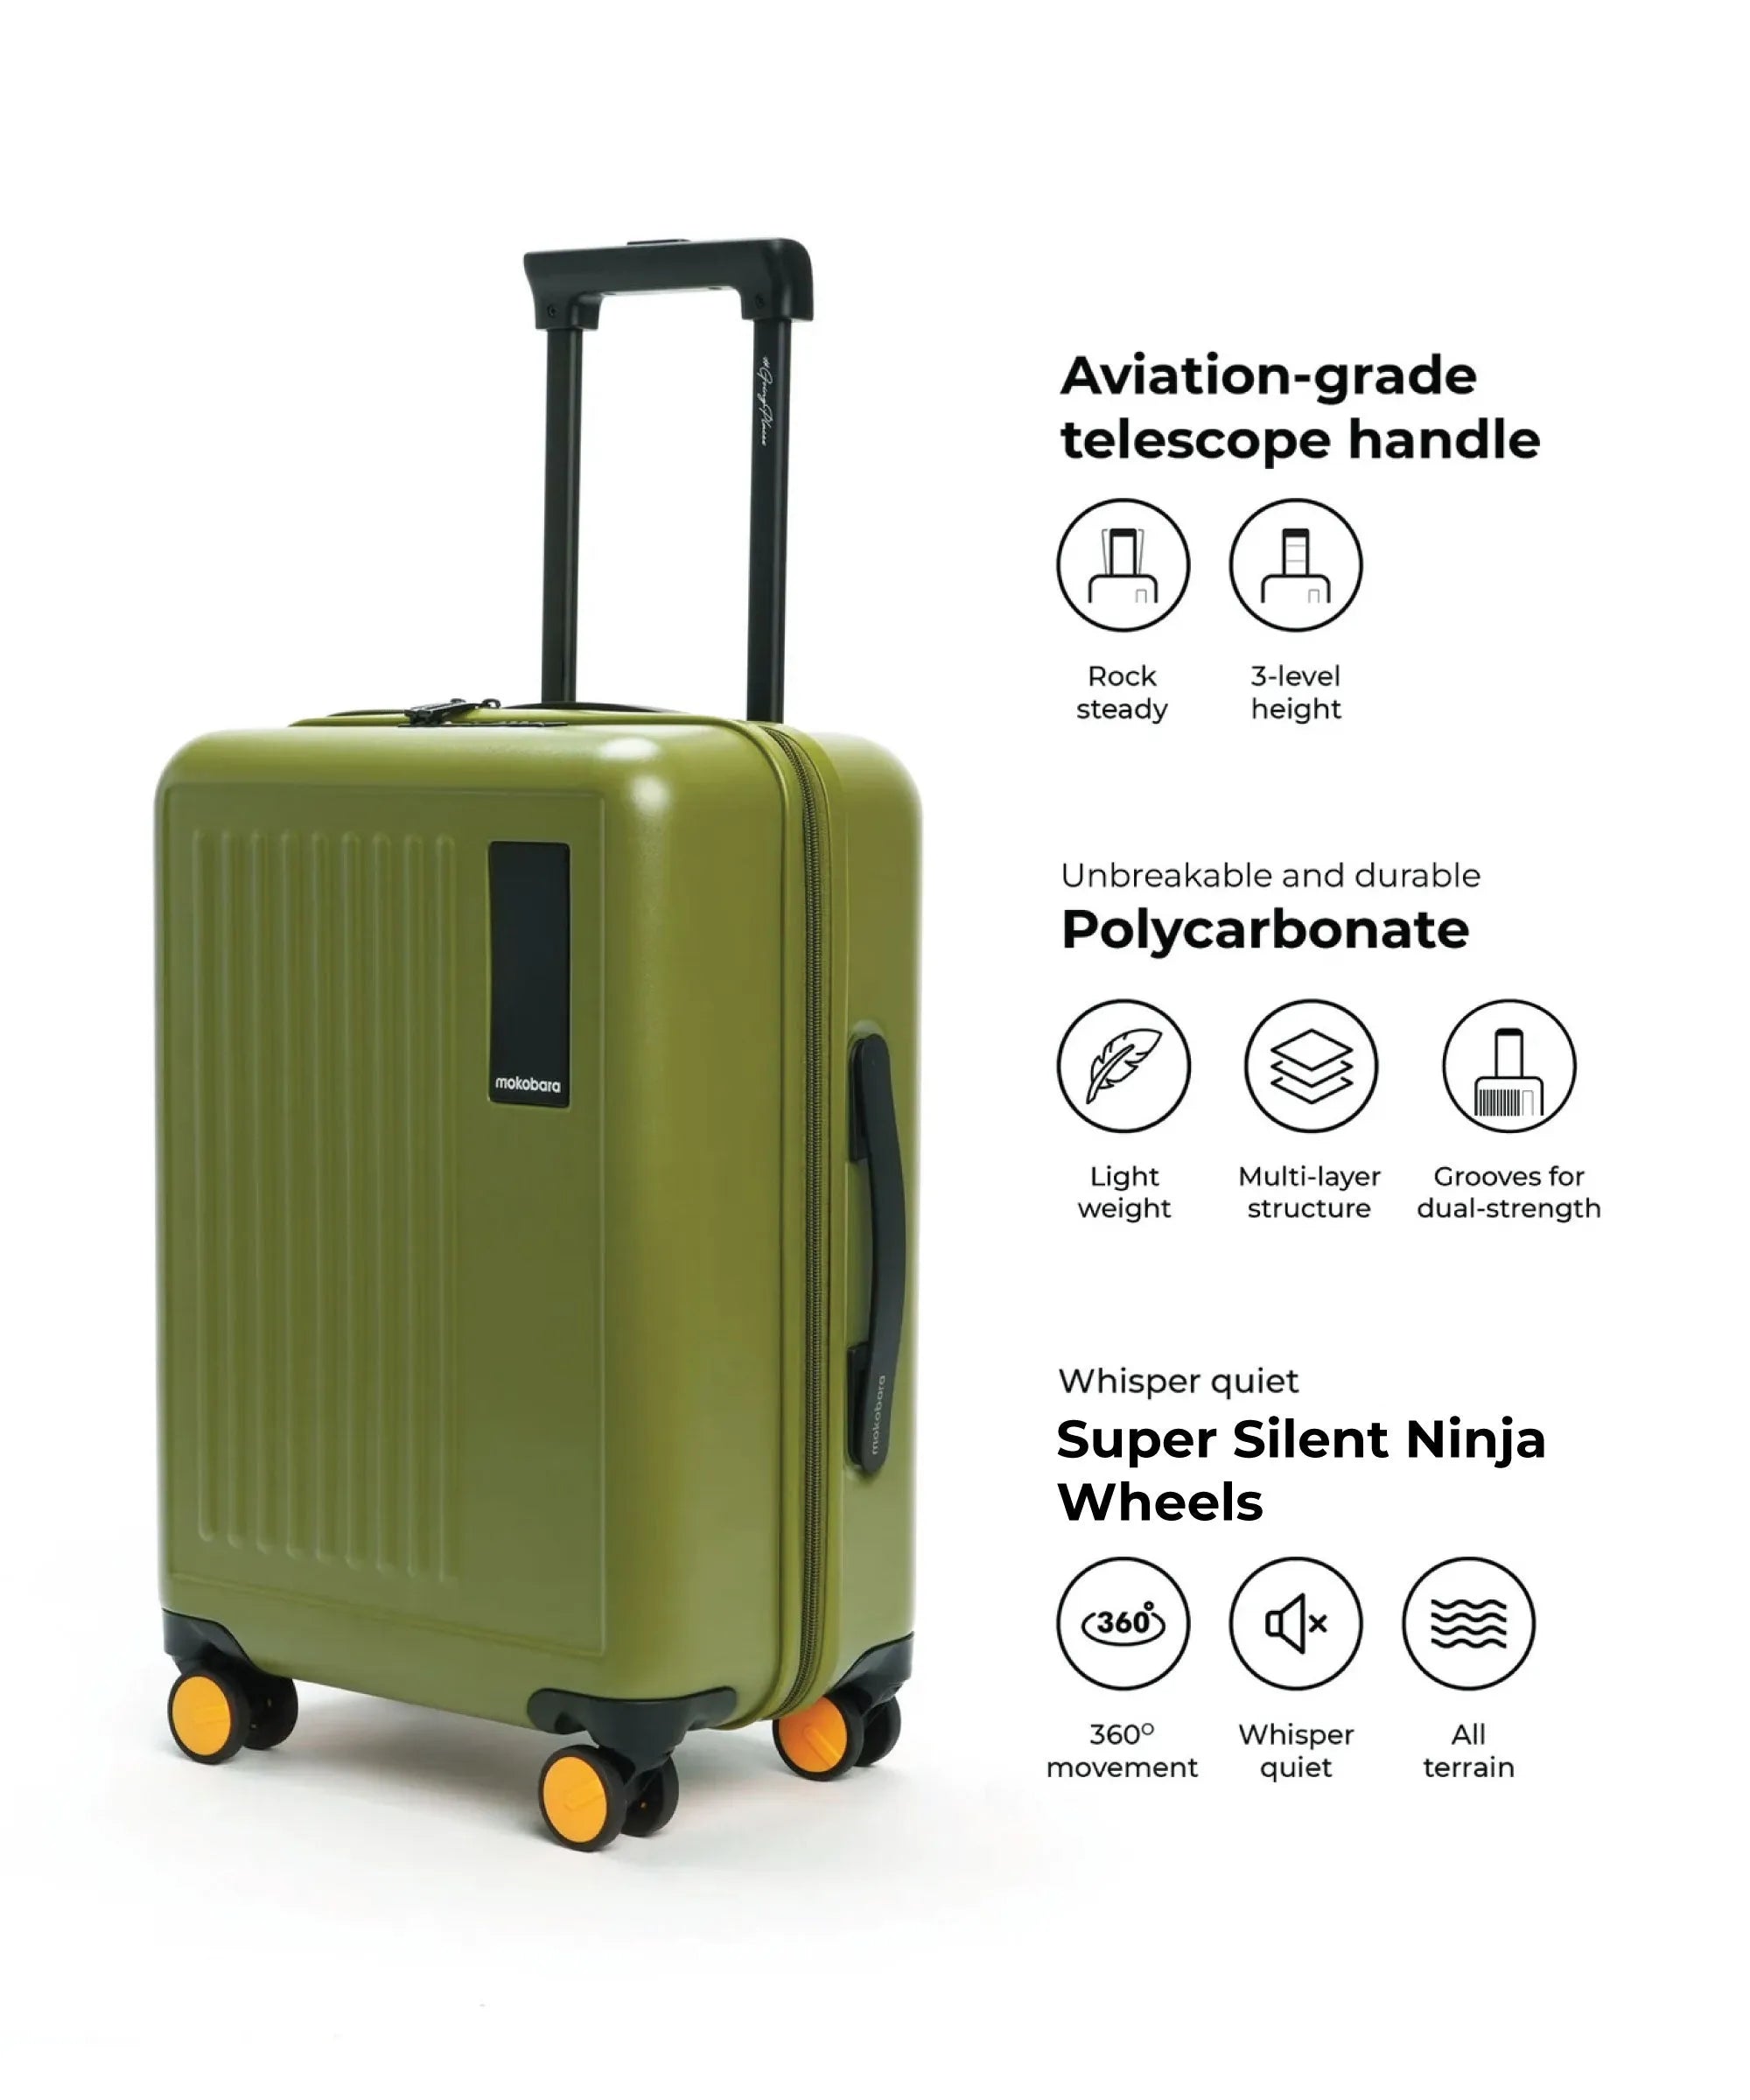 Color_So Matcha | The Transit Luggage - Cabin